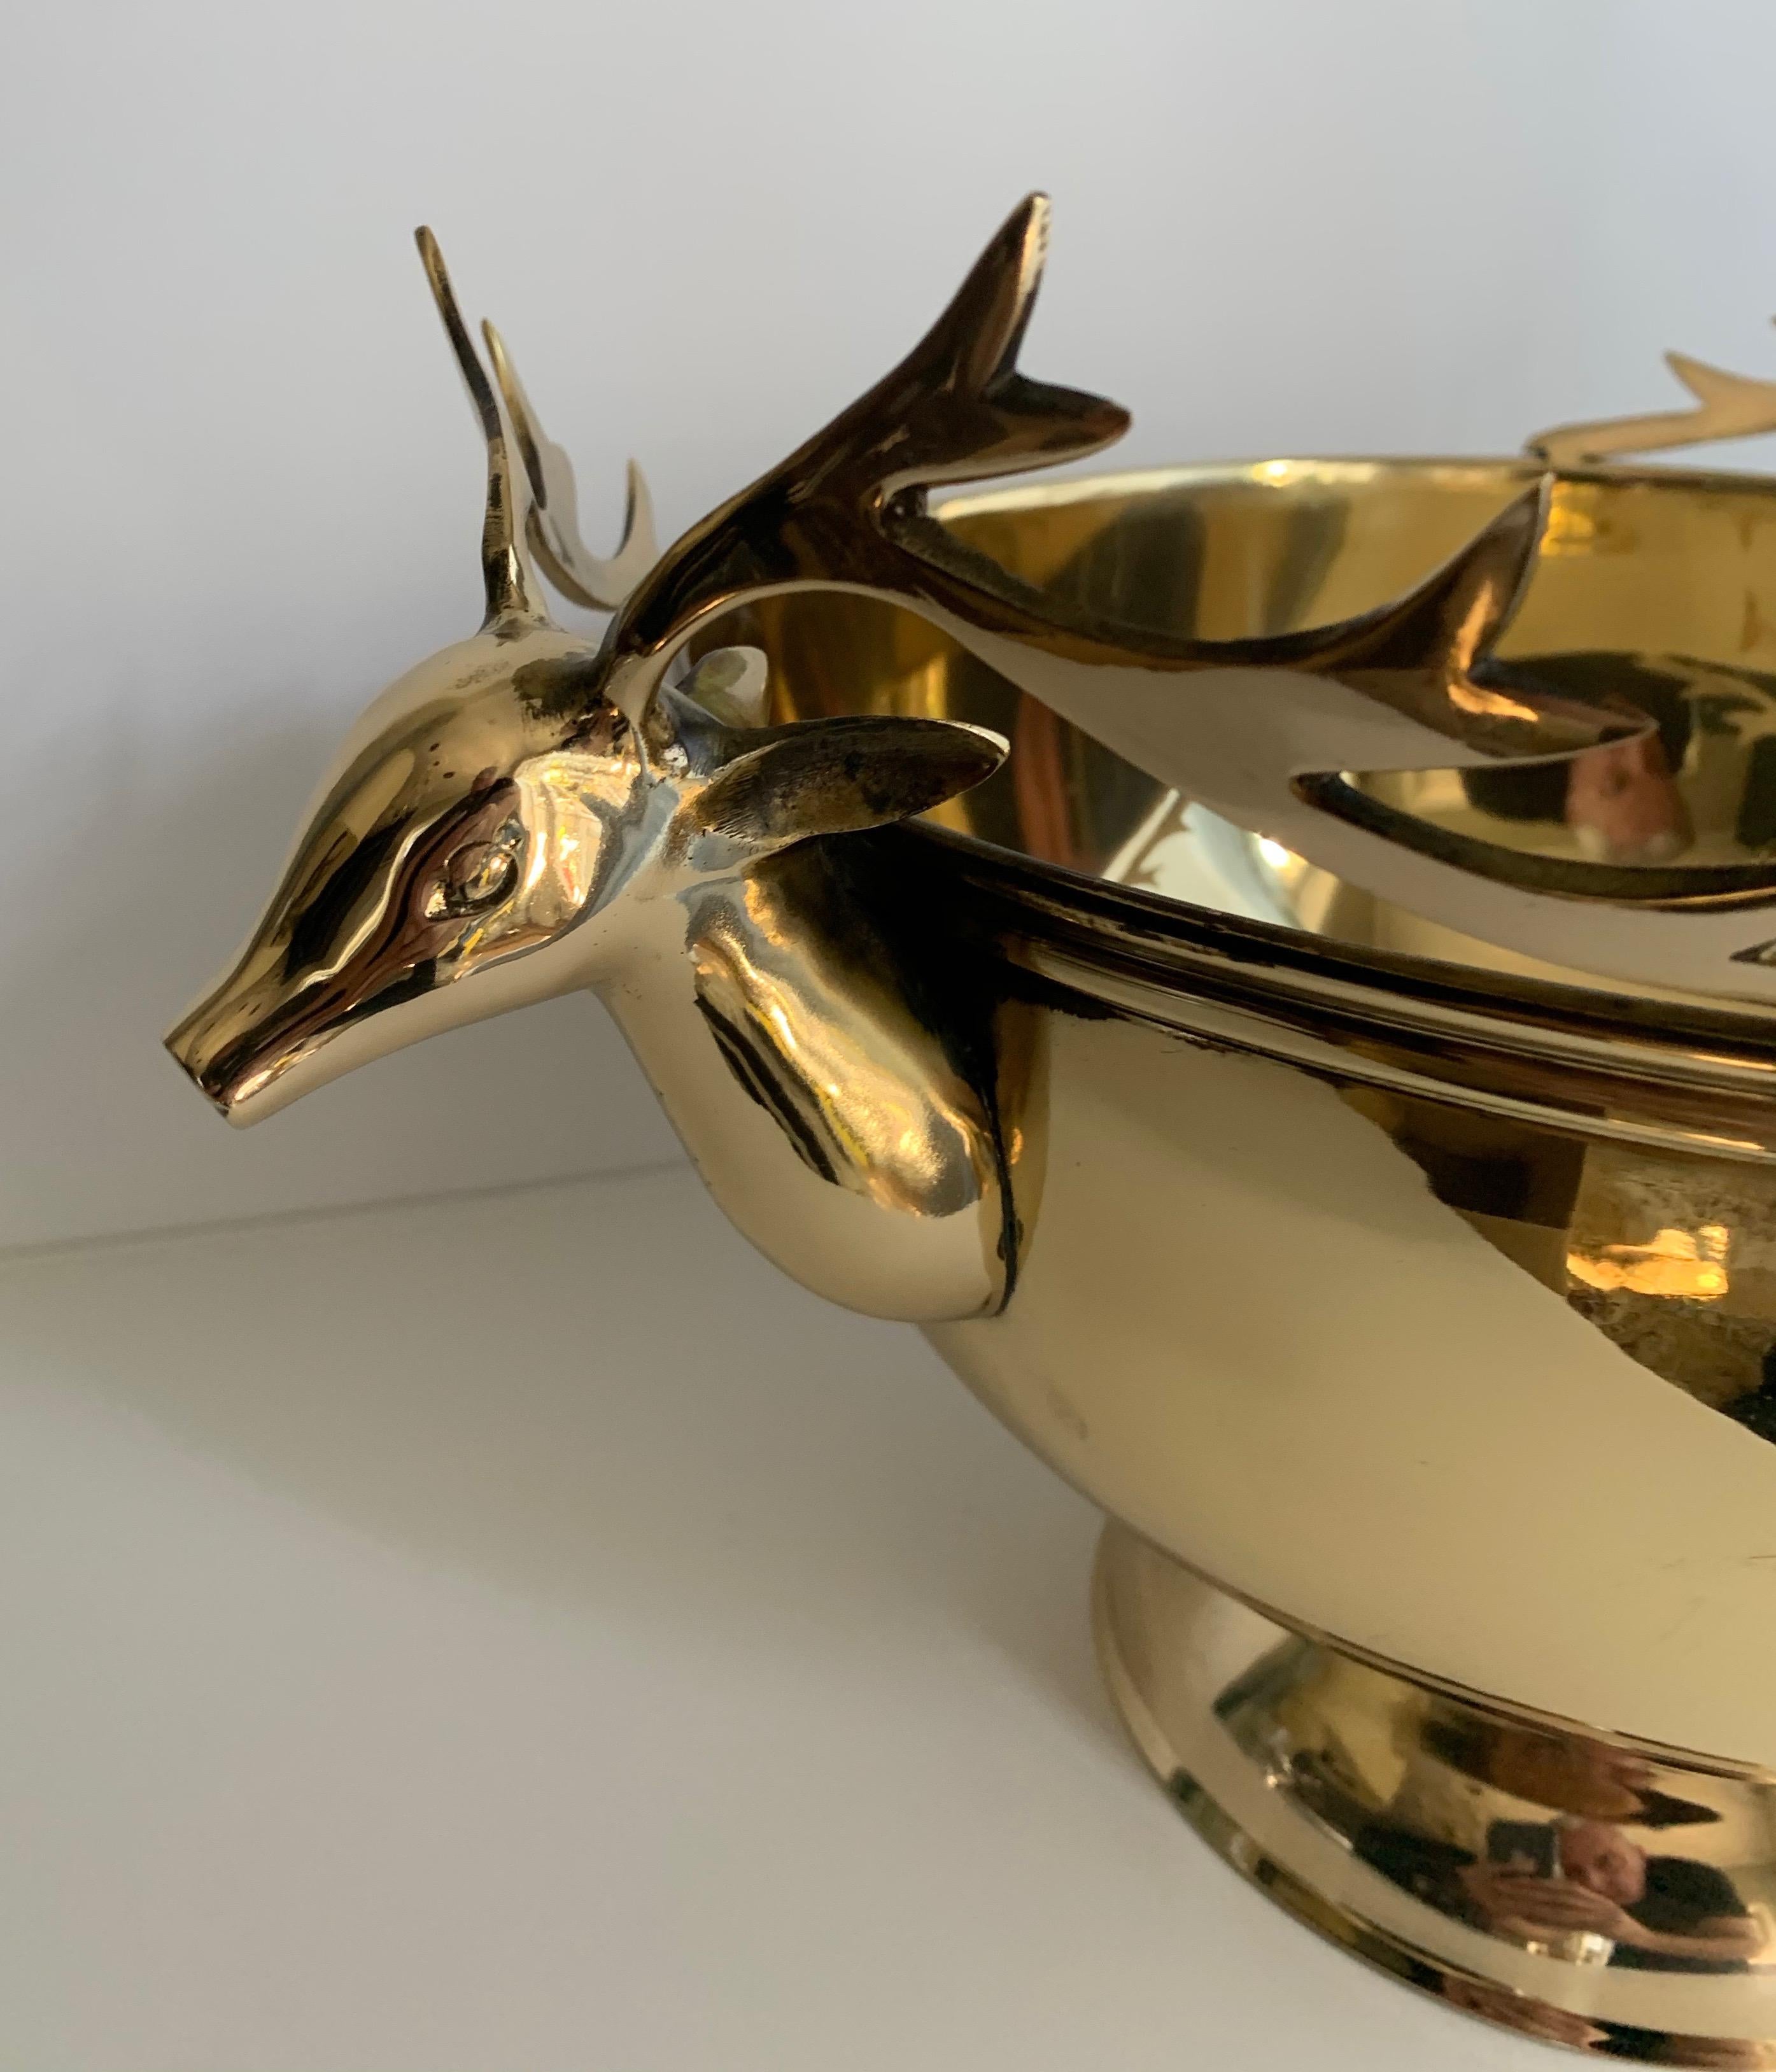 Solid brass stag head bowl, a lovely bowl, perfect for any occasion, the holidays or as a centerpiece. Freshly polished and ready for any table!